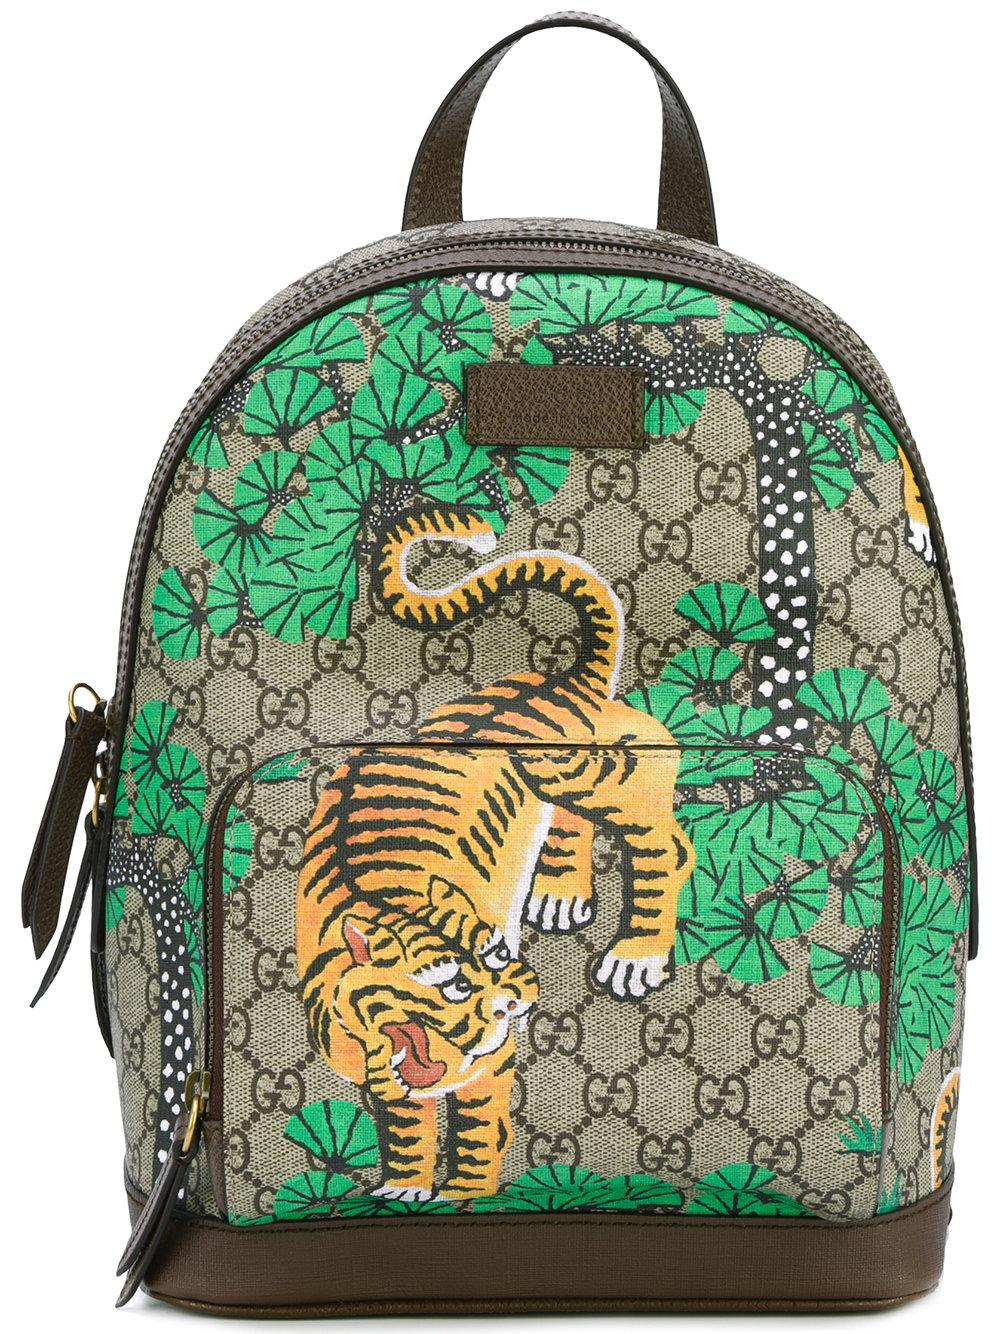 Gucci Bengal Tiger Print Backpack for Men - Lyst